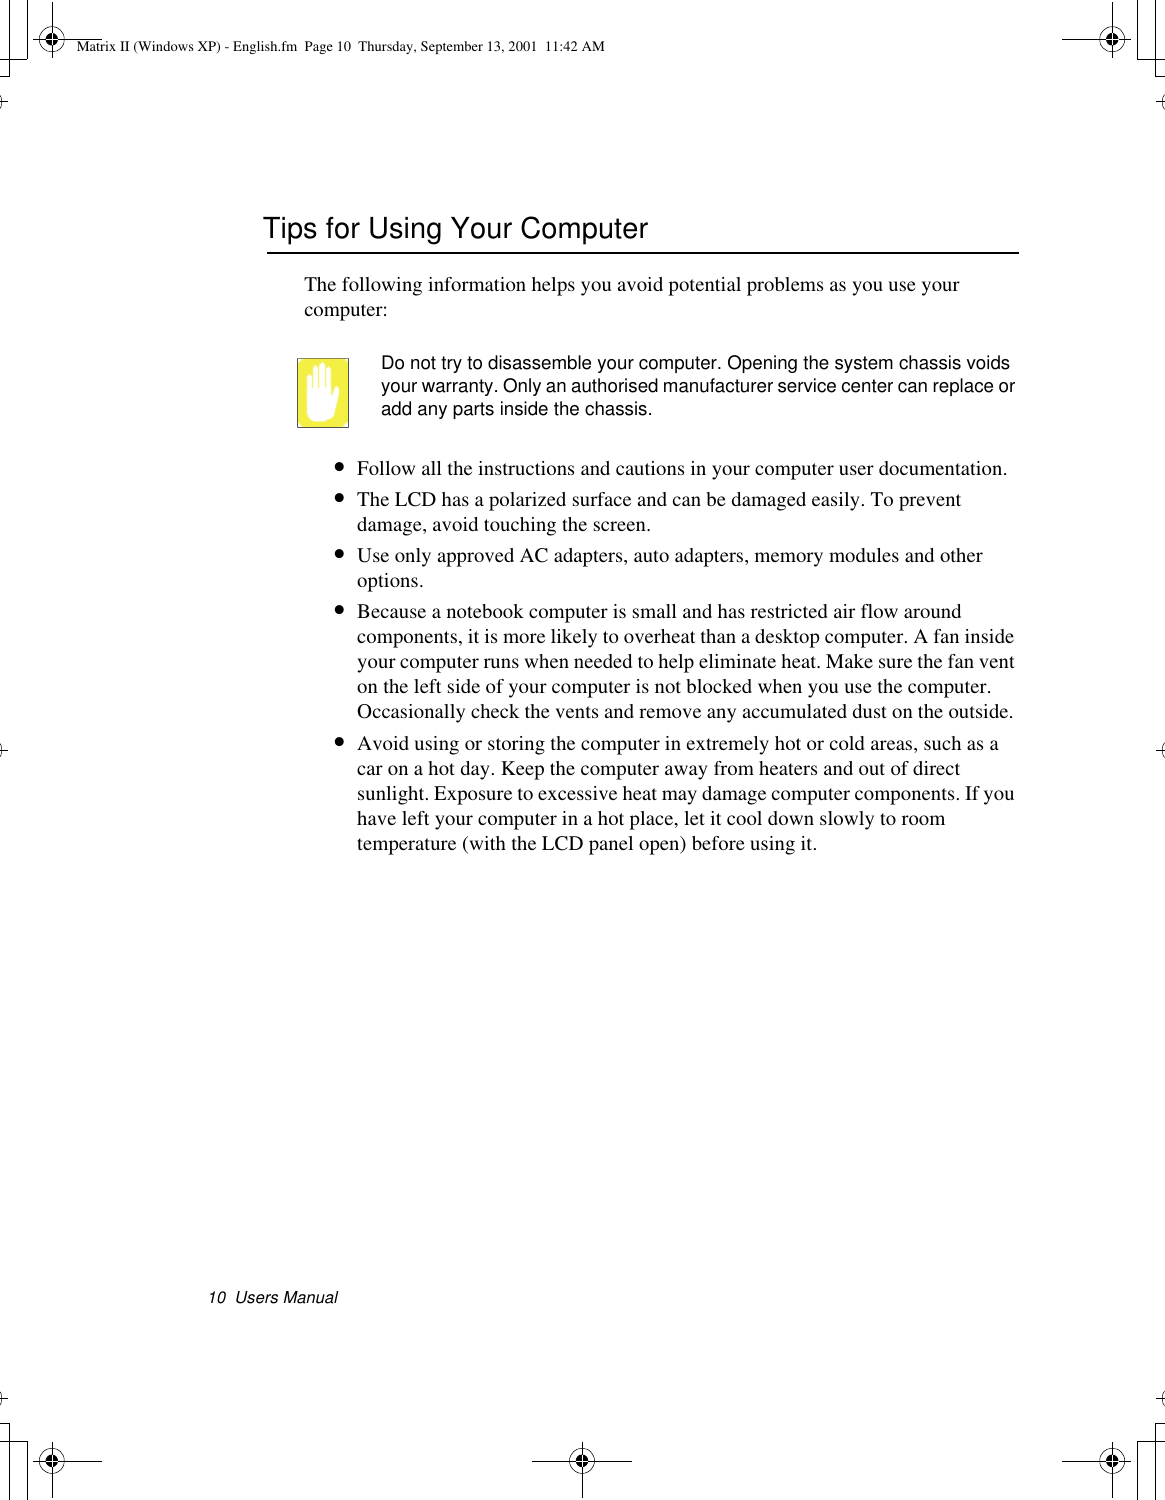 10  Users ManualTips for Using Your ComputerThe following information helps you avoid potential problems as you use your computer:Do not try to disassemble your computer. Opening the system chassis voids your warranty. Only an authorised manufacturer service center can replace or add any parts inside the chassis.•Follow all the instructions and cautions in your computer user documentation.•The LCD has a polarized surface and can be damaged easily. To prevent damage, avoid touching the screen.•Use only approved AC adapters, auto adapters, memory modules and other options.•Because a notebook computer is small and has restricted air flow around components, it is more likely to overheat than a desktop computer. A fan inside your computer runs when needed to help eliminate heat. Make sure the fan vent on the left side of your computer is not blocked when you use the computer.  Occasionally check the vents and remove any accumulated dust on the outside. •Avoid using or storing the computer in extremely hot or cold areas, such as a car on a hot day. Keep the computer away from heaters and out of direct sunlight. Exposure to excessive heat may damage computer components. If you have left your computer in a hot place, let it cool down slowly to room temperature (with the LCD panel open) before using it.Matrix II (Windows XP) - English.fm  Page 10  Thursday, September 13, 2001  11:42 AM